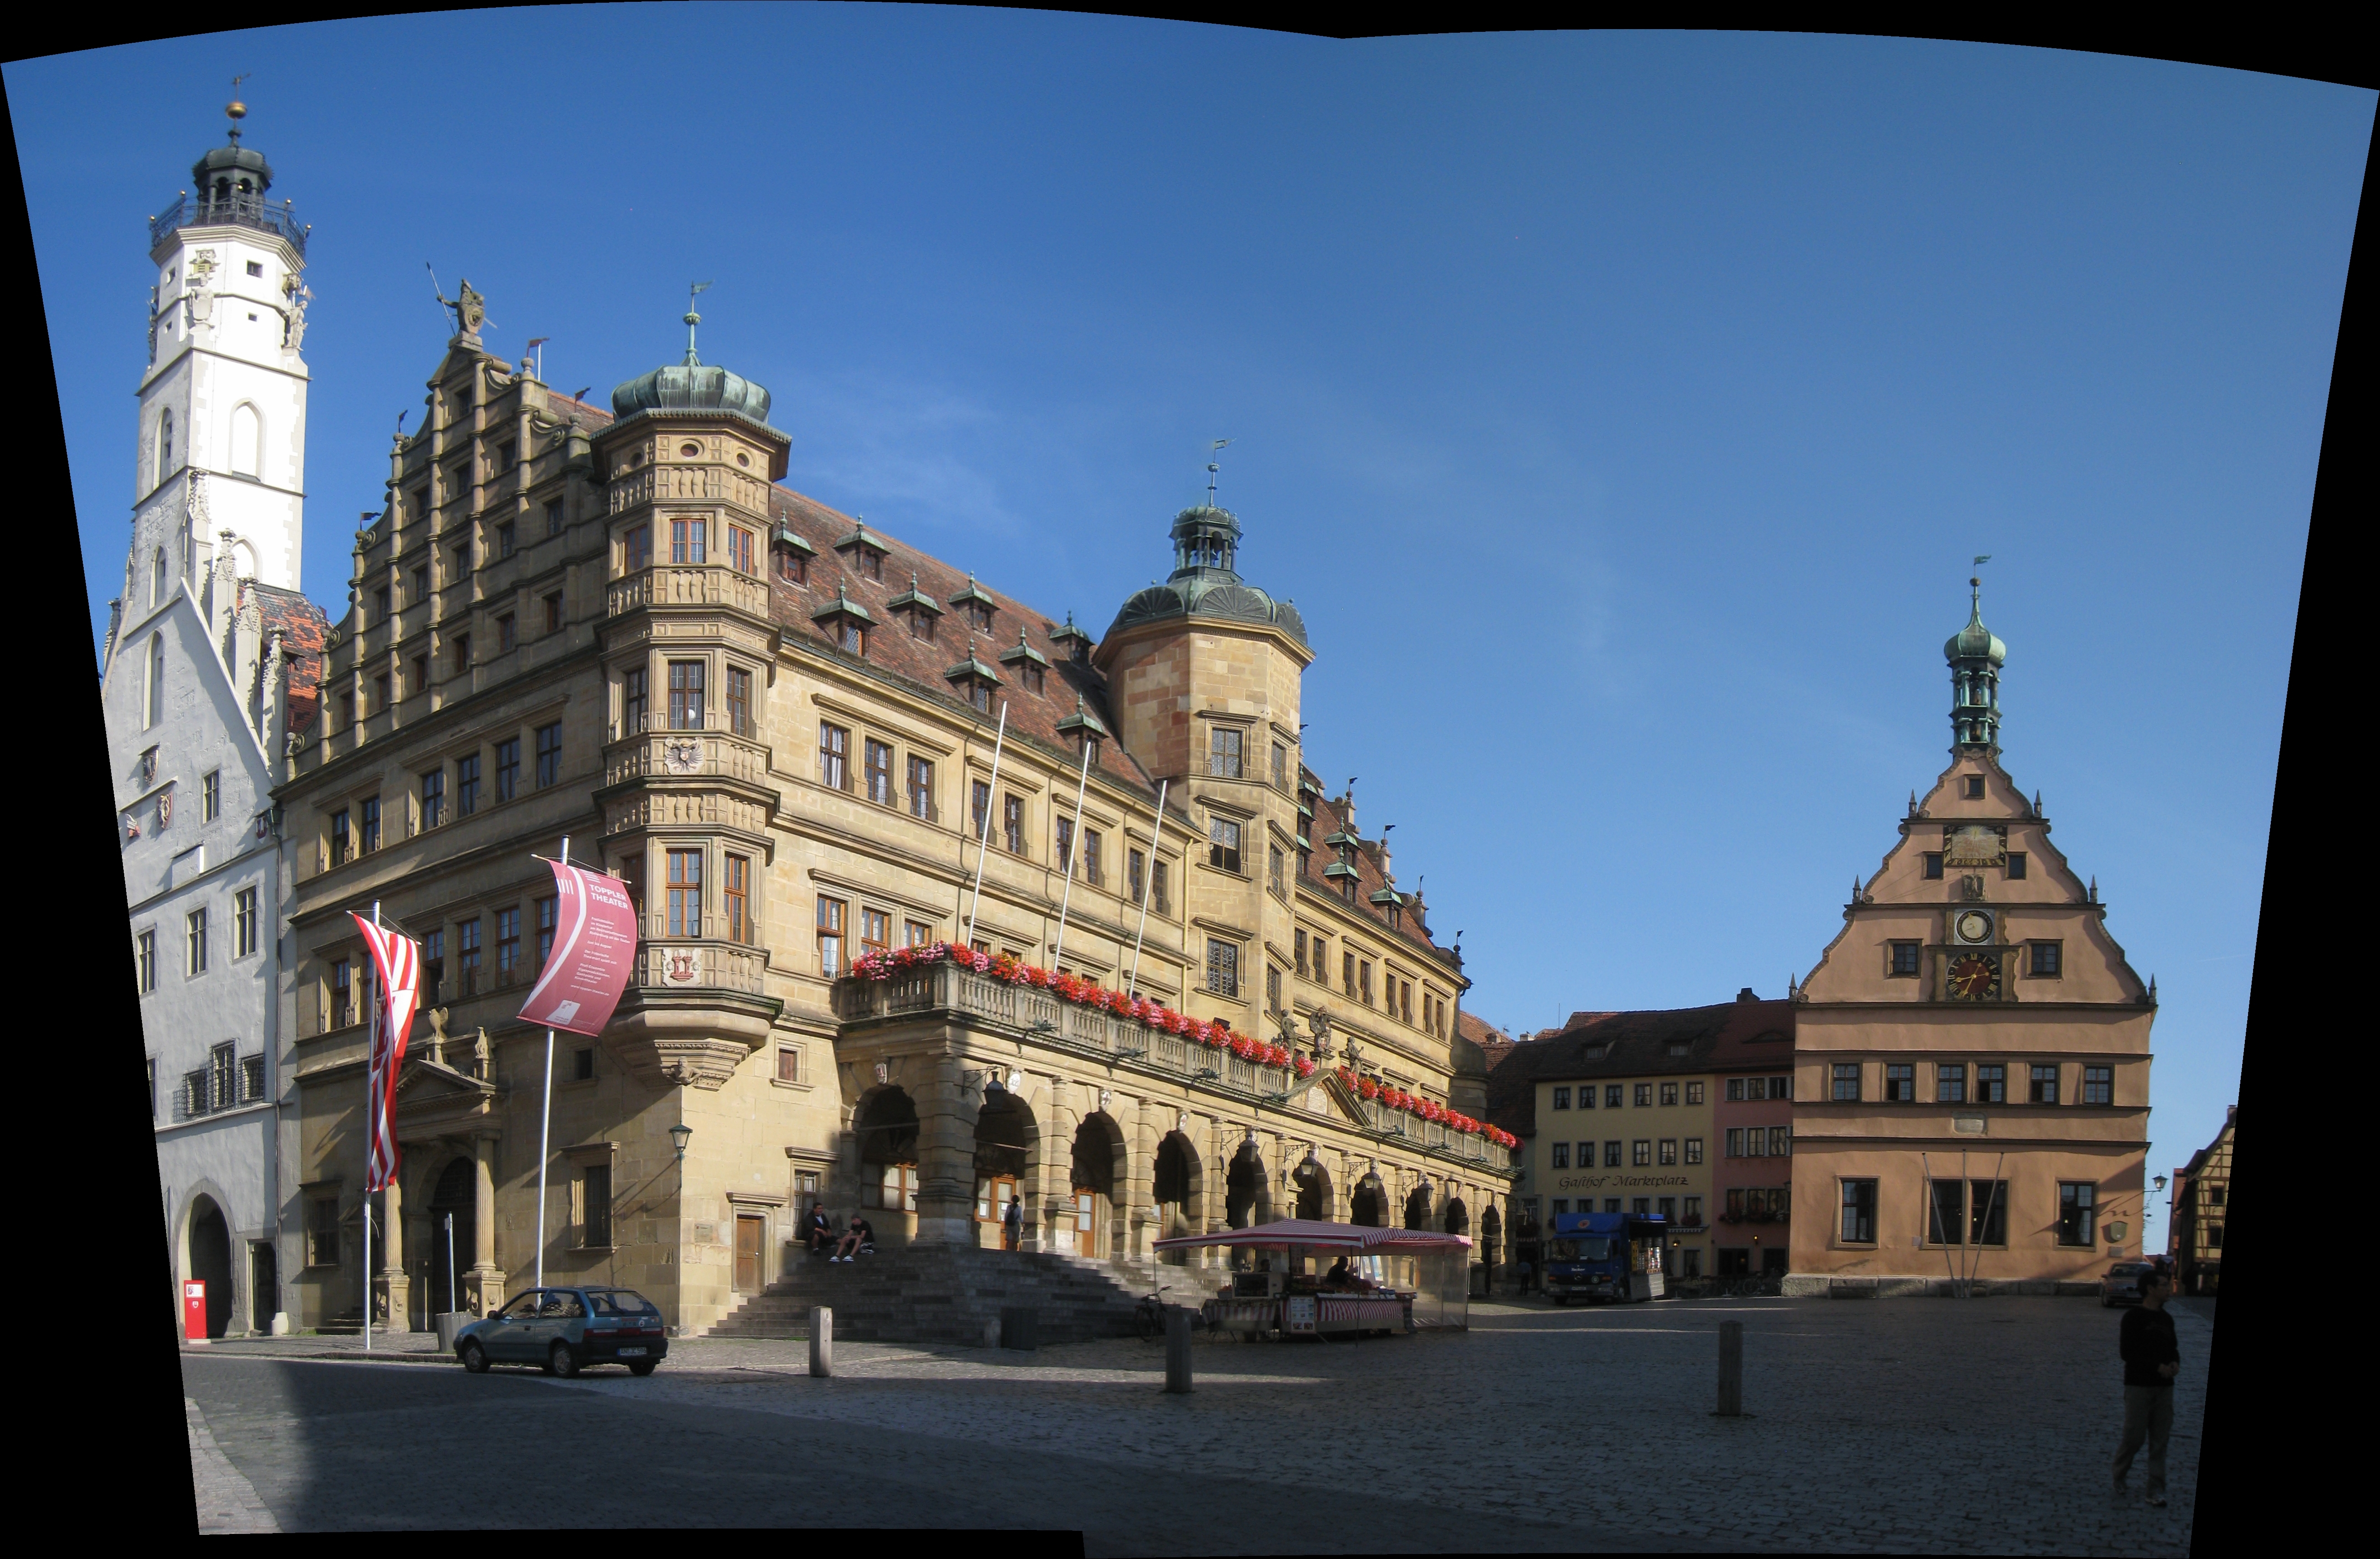 File:Town hall, pano2 - Rothenburg ob der Tauber.jpg - Wikimedia Commons